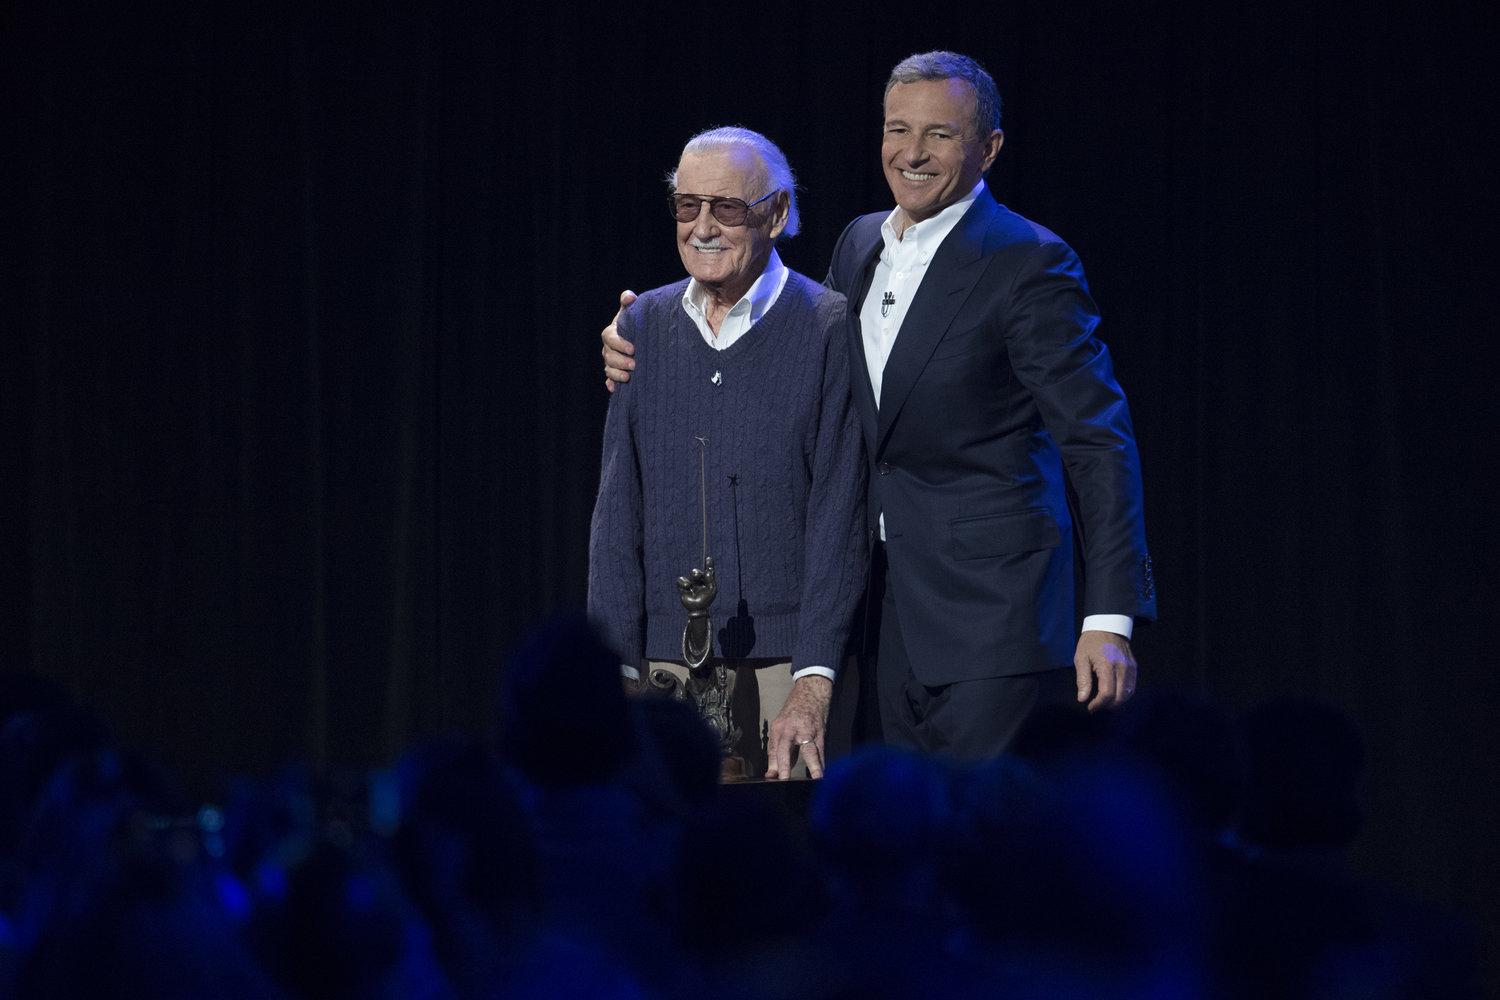 STAN LEE, ROBERT A. IGER (CHAIRMAN AND CHIEF EXECUTIVE